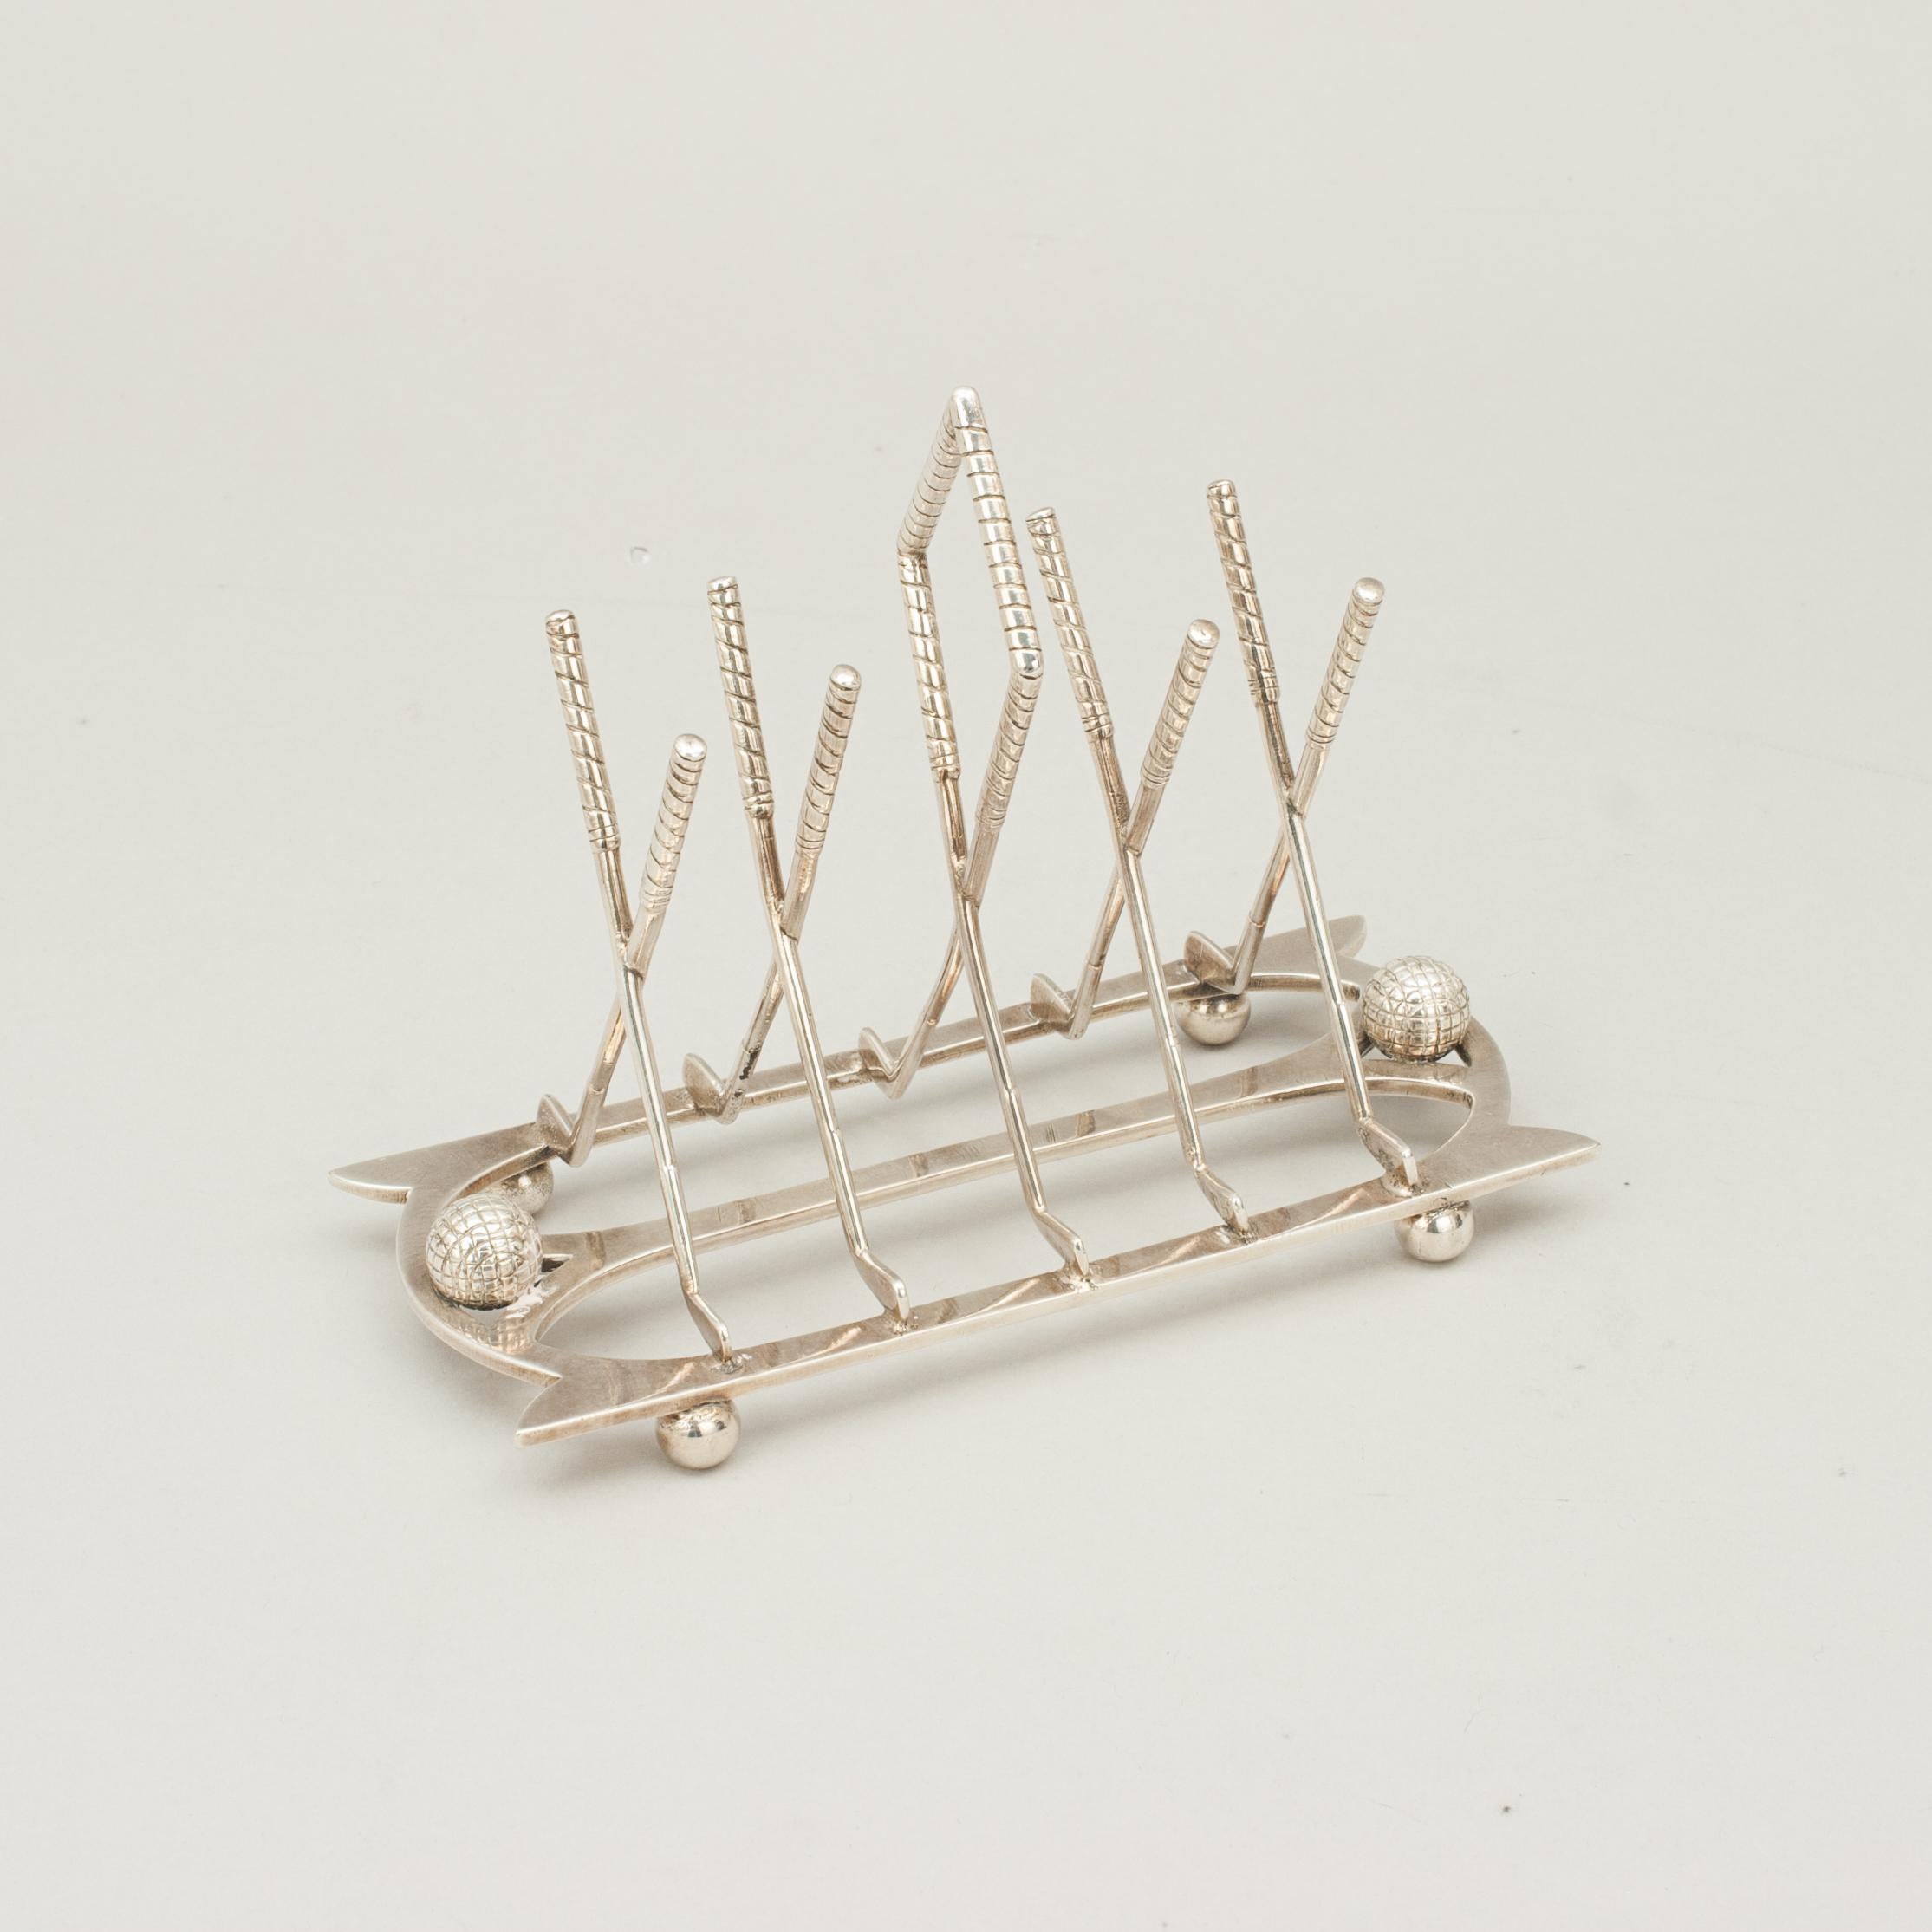 Antique Golf Toast Rack, Silver Plate 4